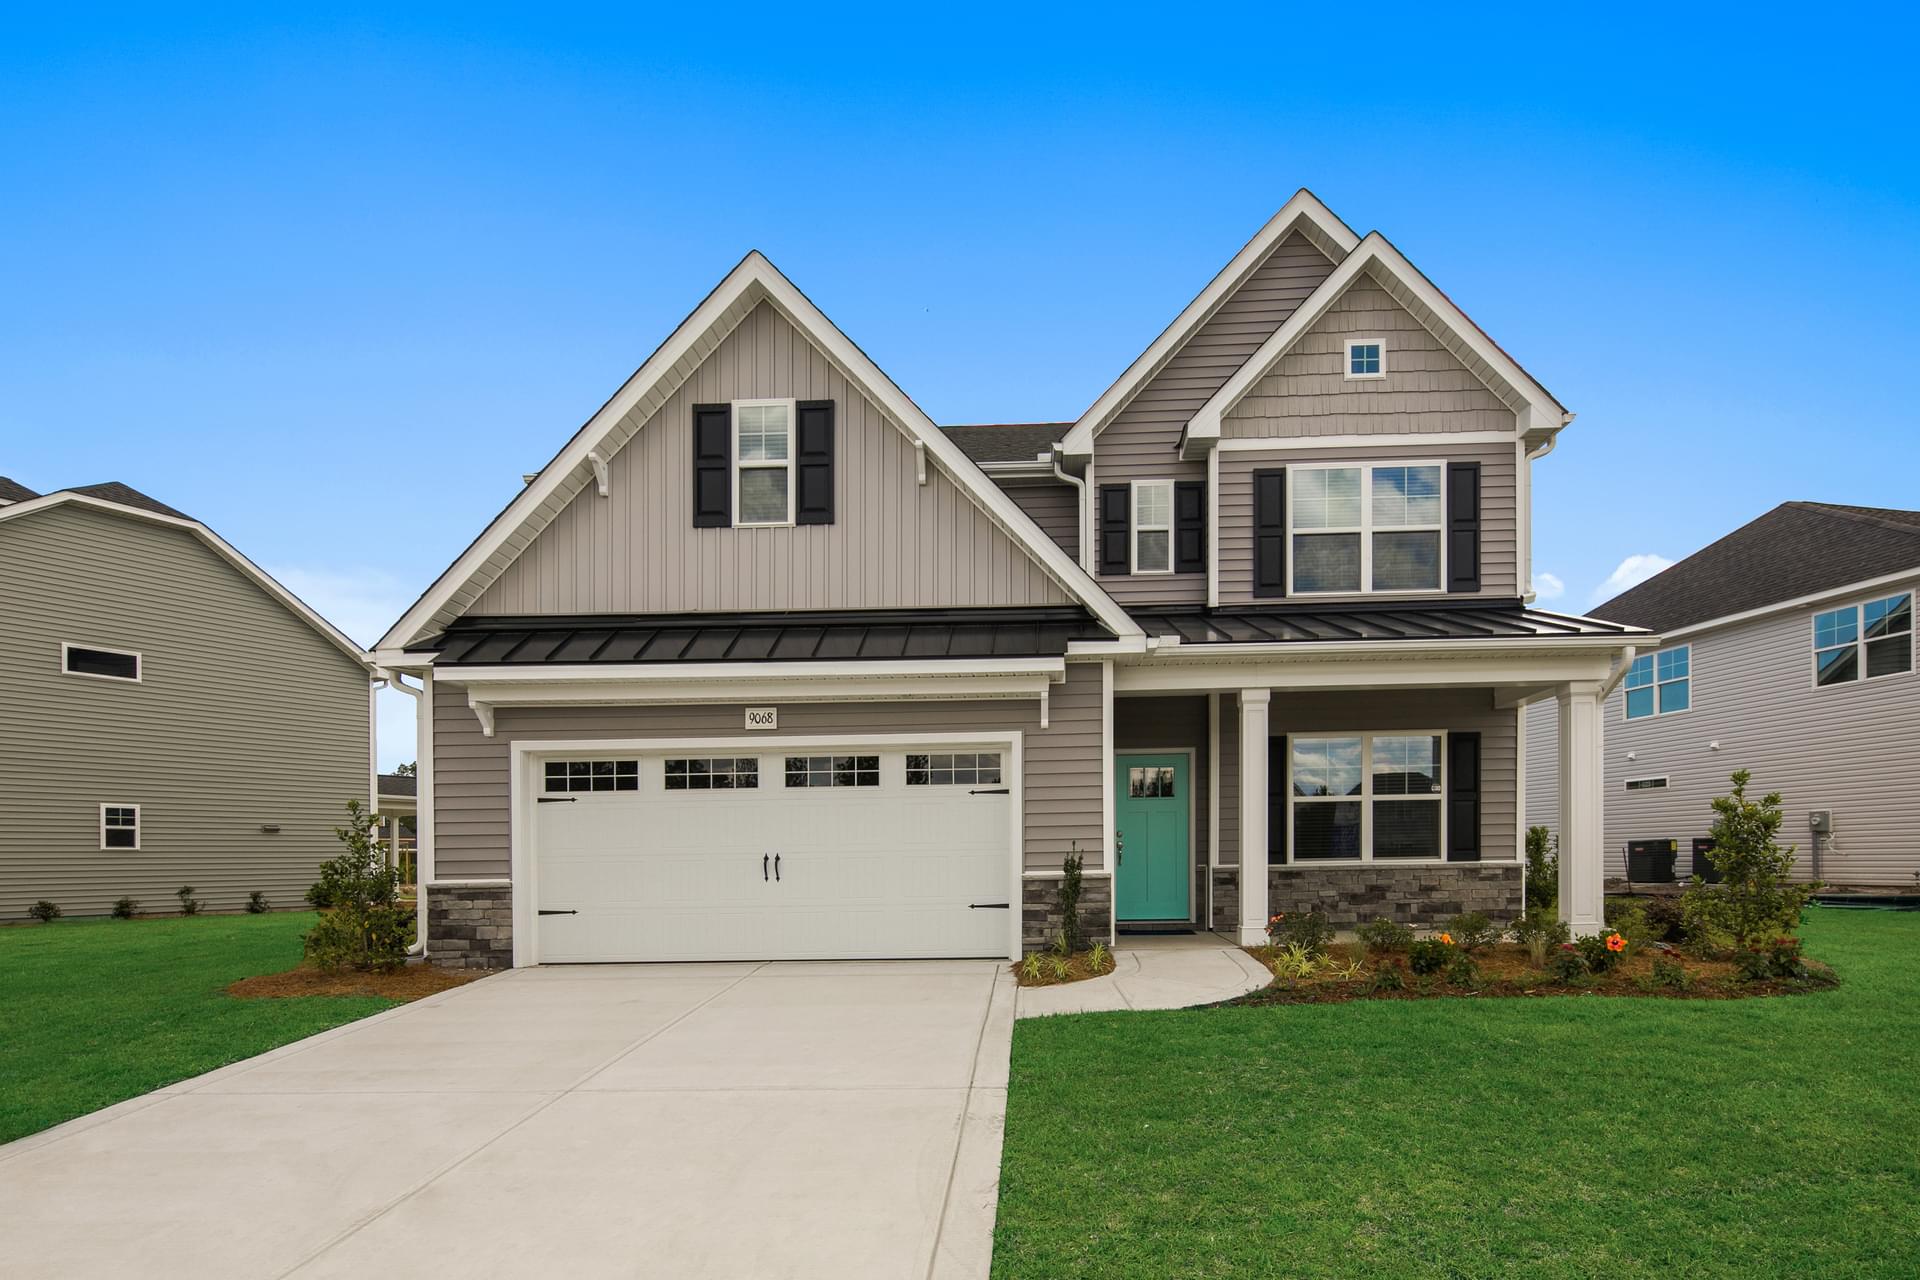 New Homes in Leland, NC Grayson Park from Caviness & Cates Communities